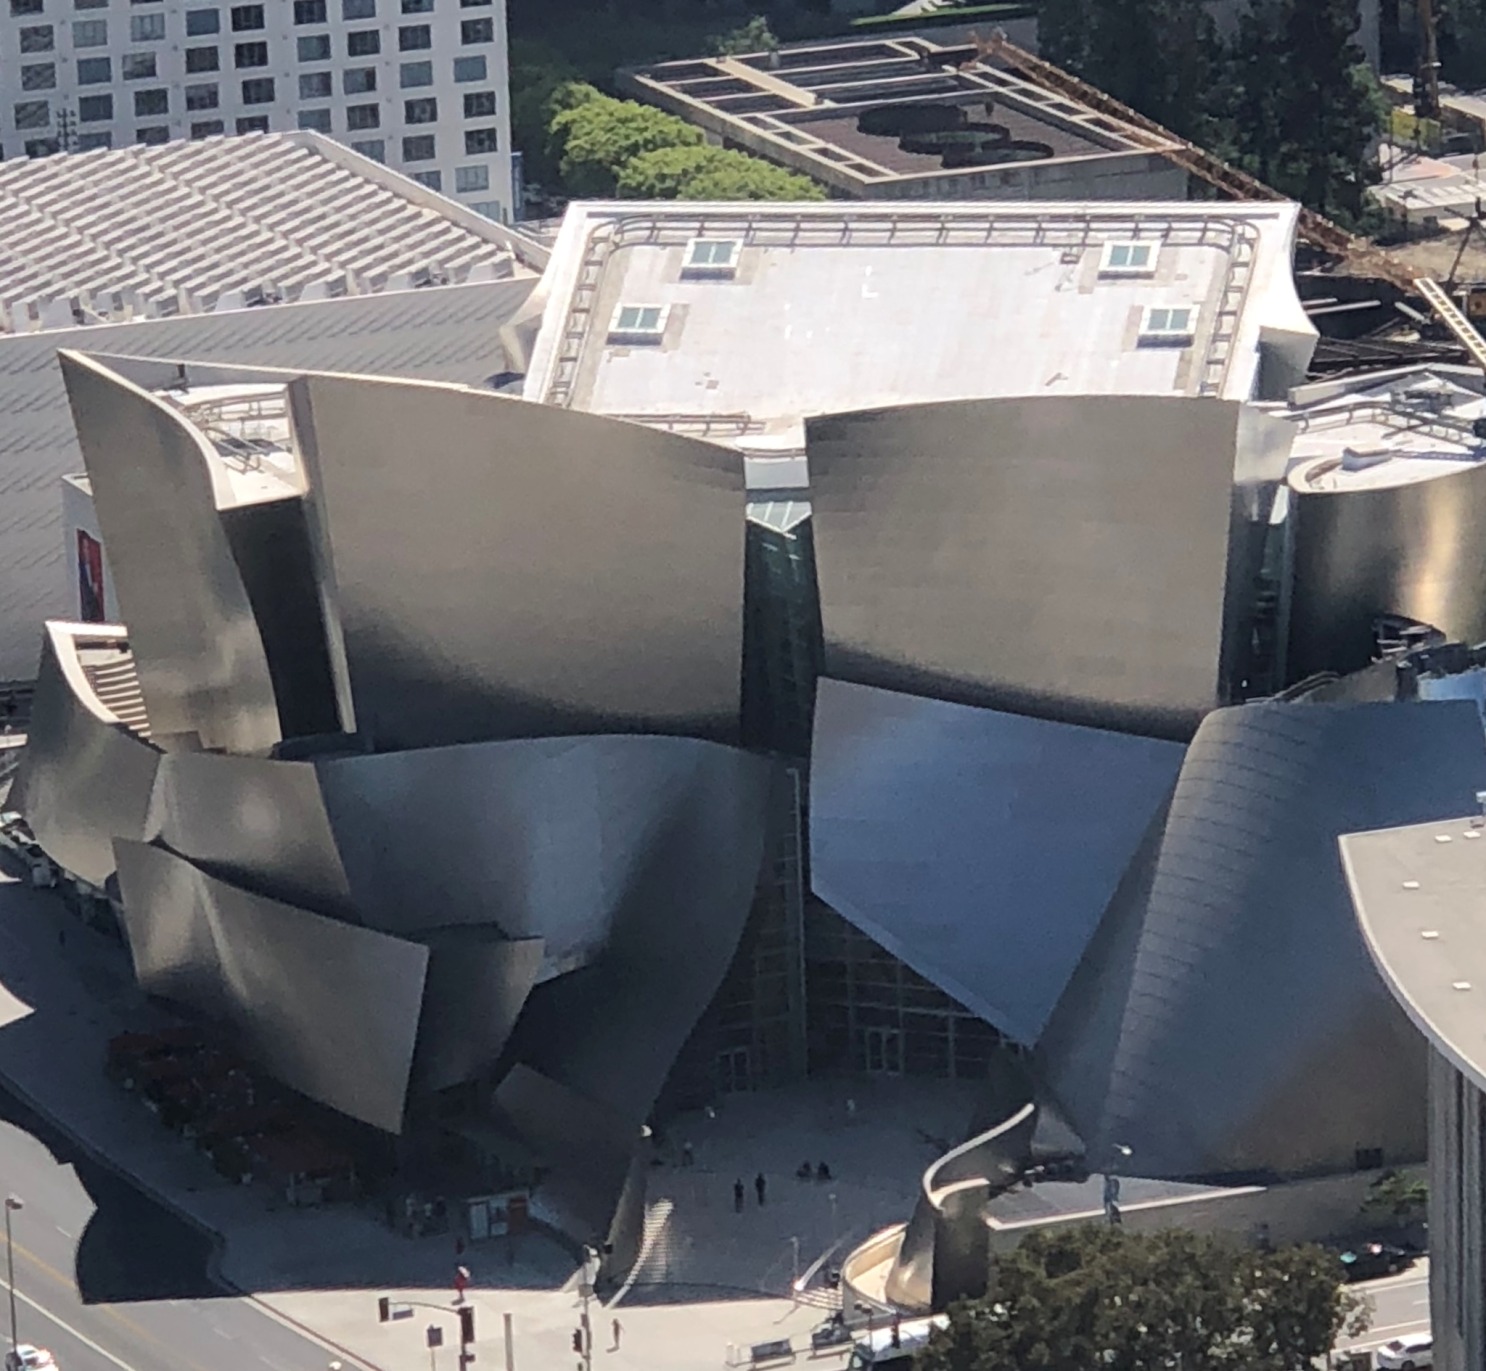 For Sale: Prominent Sunset Boulevard Project Previously Tied to Frank Gehry  – Commercial Observer